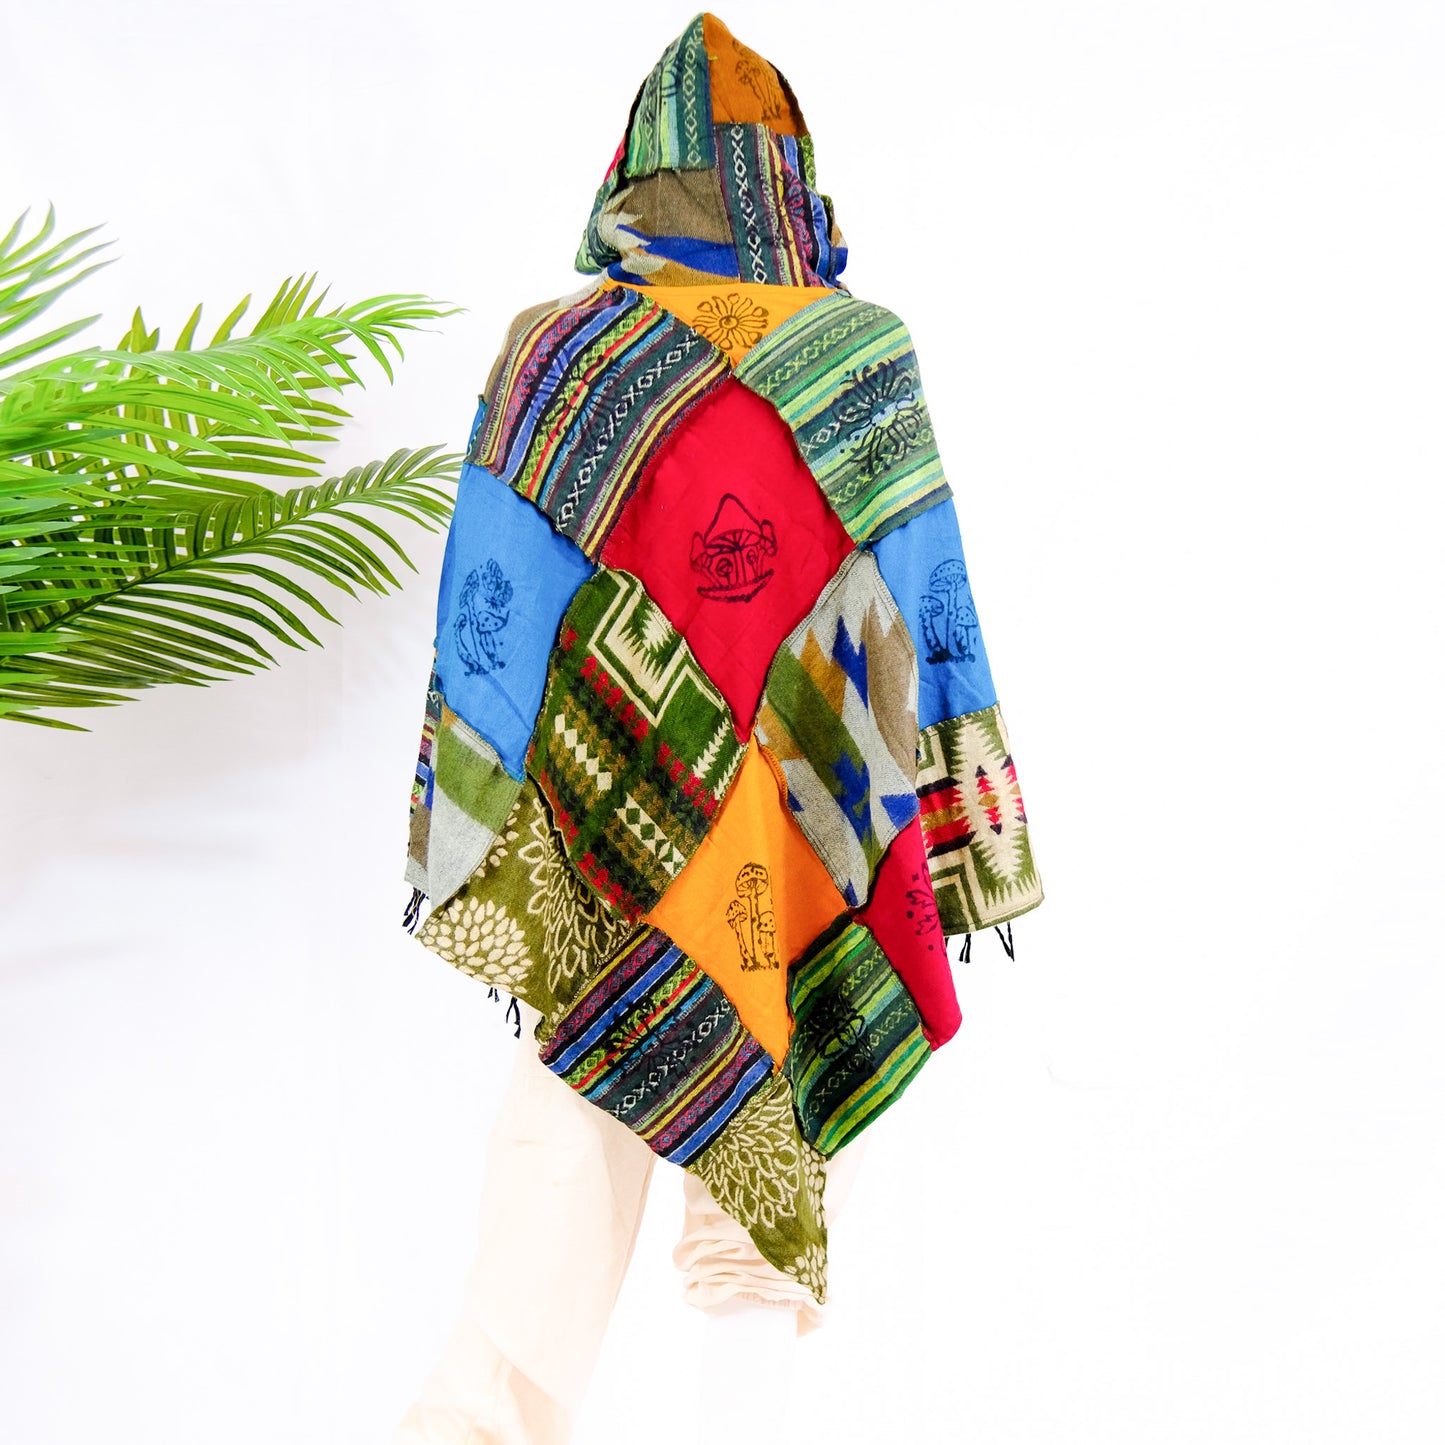 Patchwork Hooded Fall/Winter Ponchos